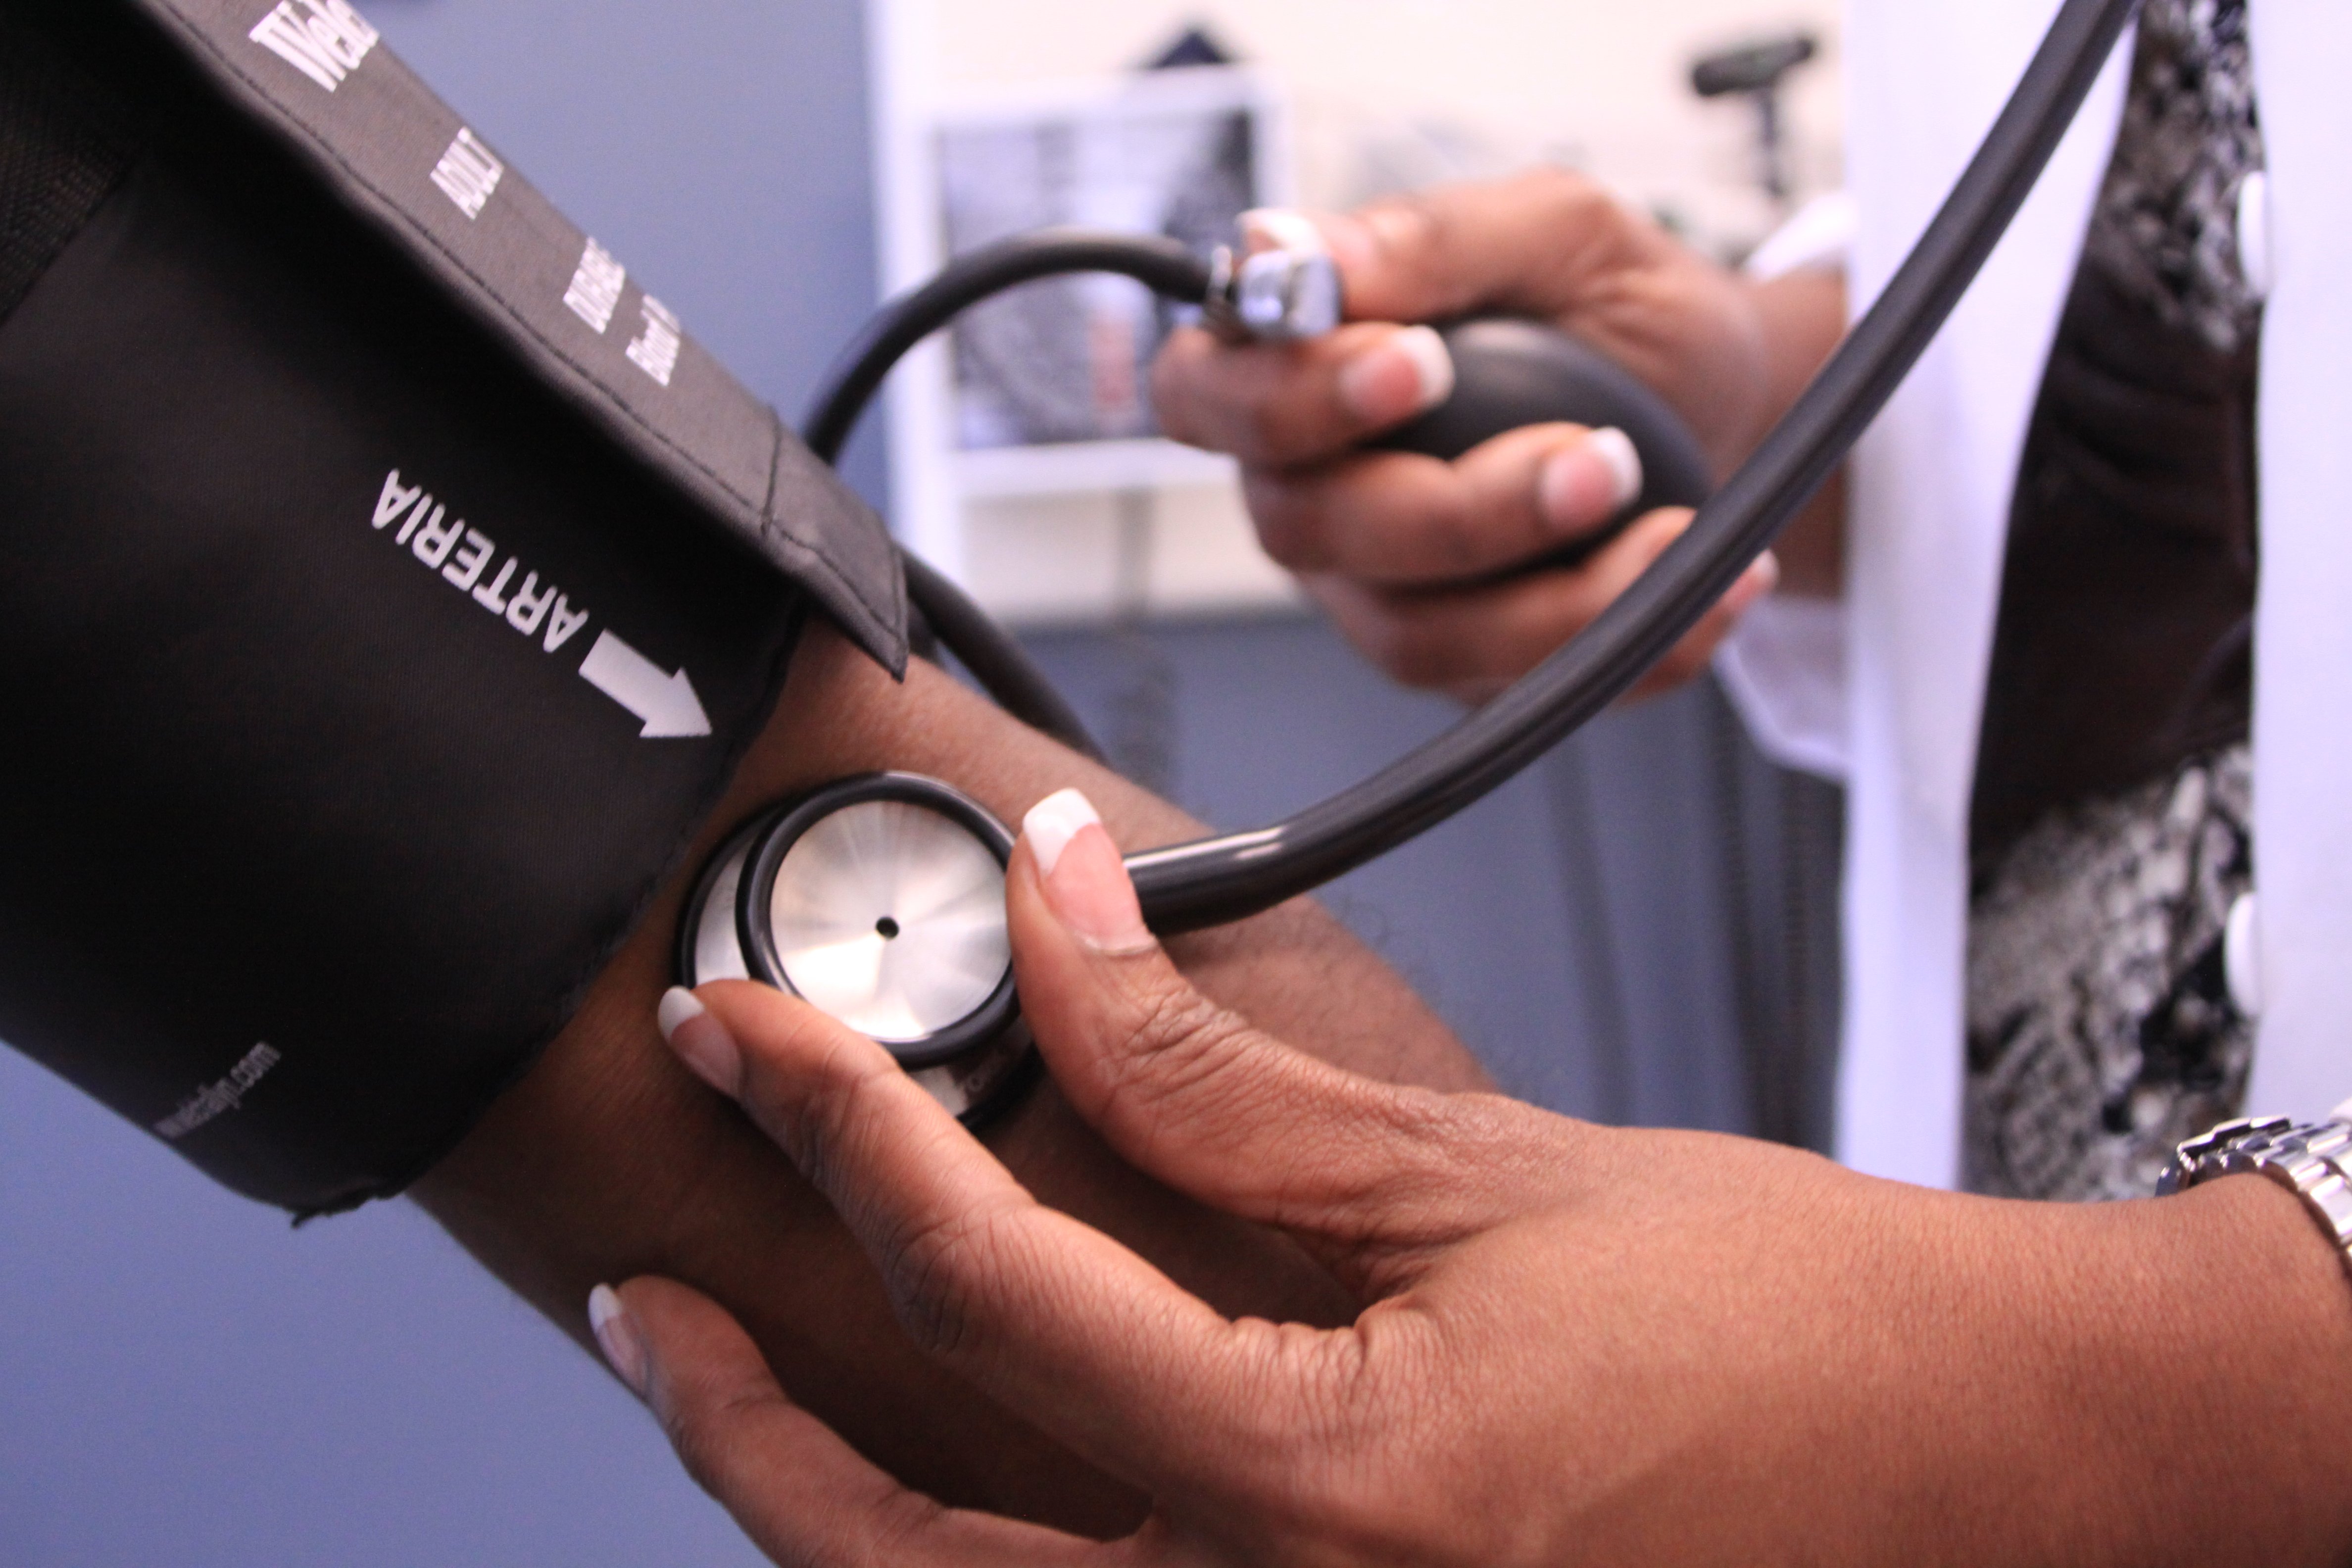 Doctors have long known that systolic blood pressure below 120 was considered normal and meant a lower risk of heart disease and kidney problems